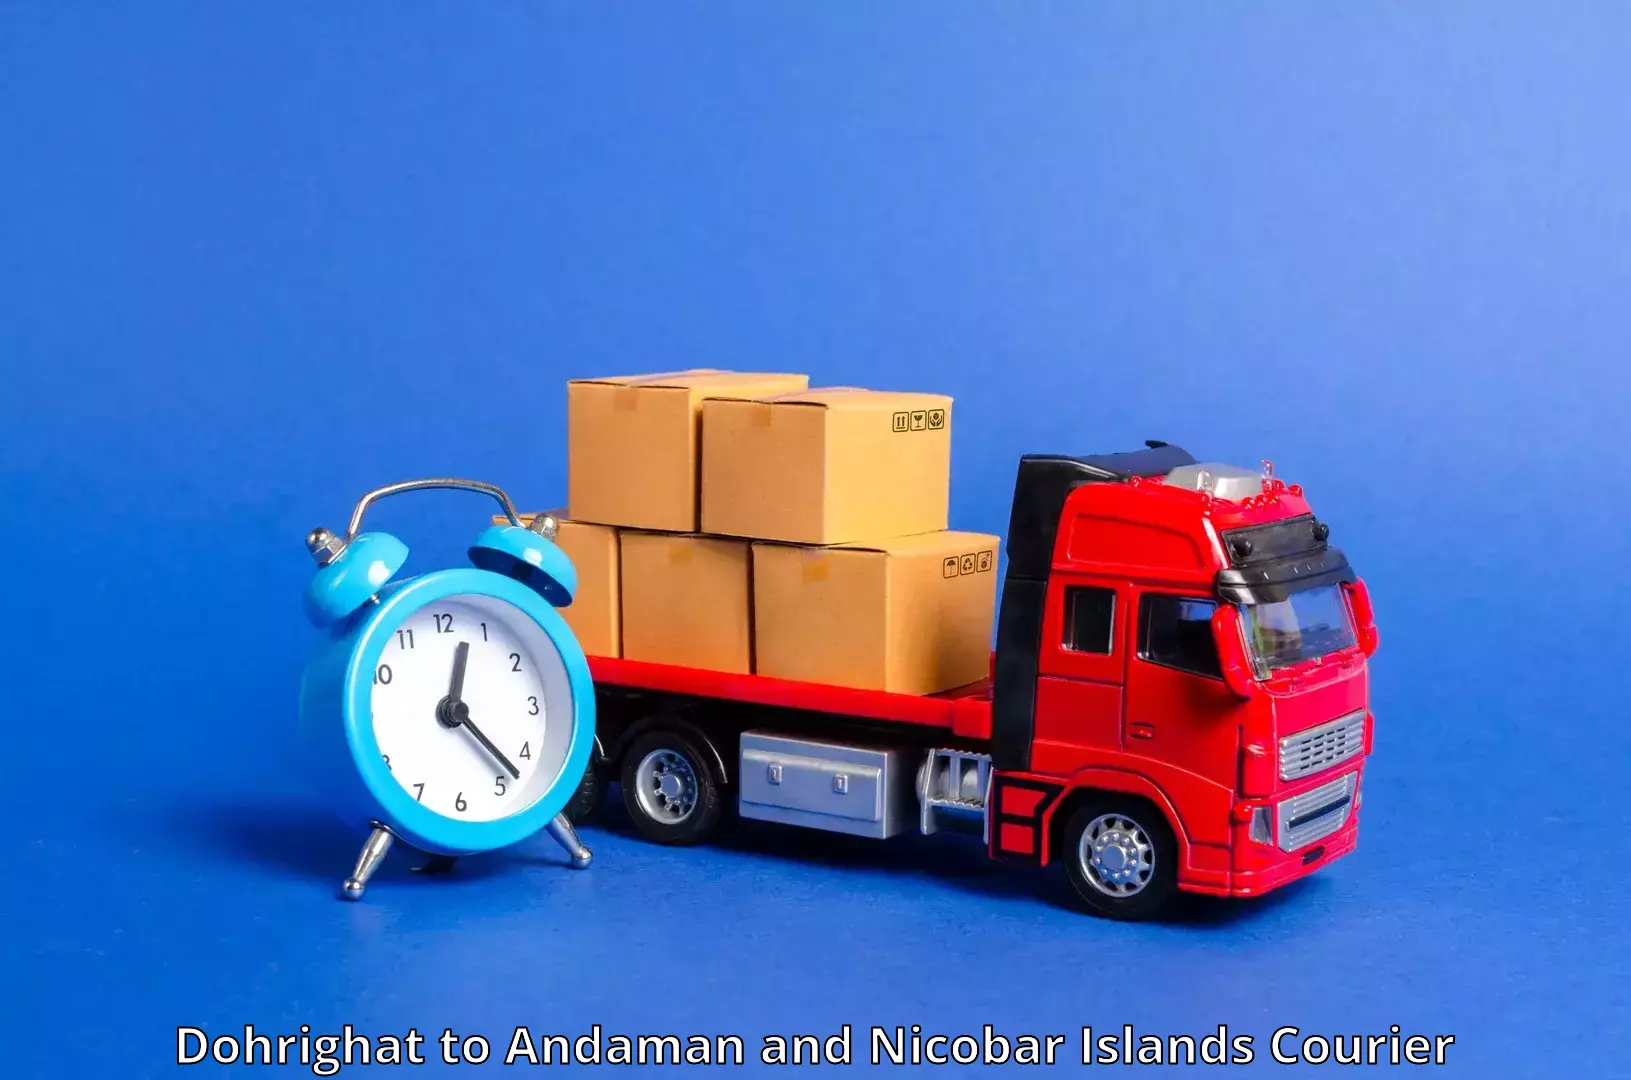 Budget-friendly shipping in Dohrighat to Port Blair